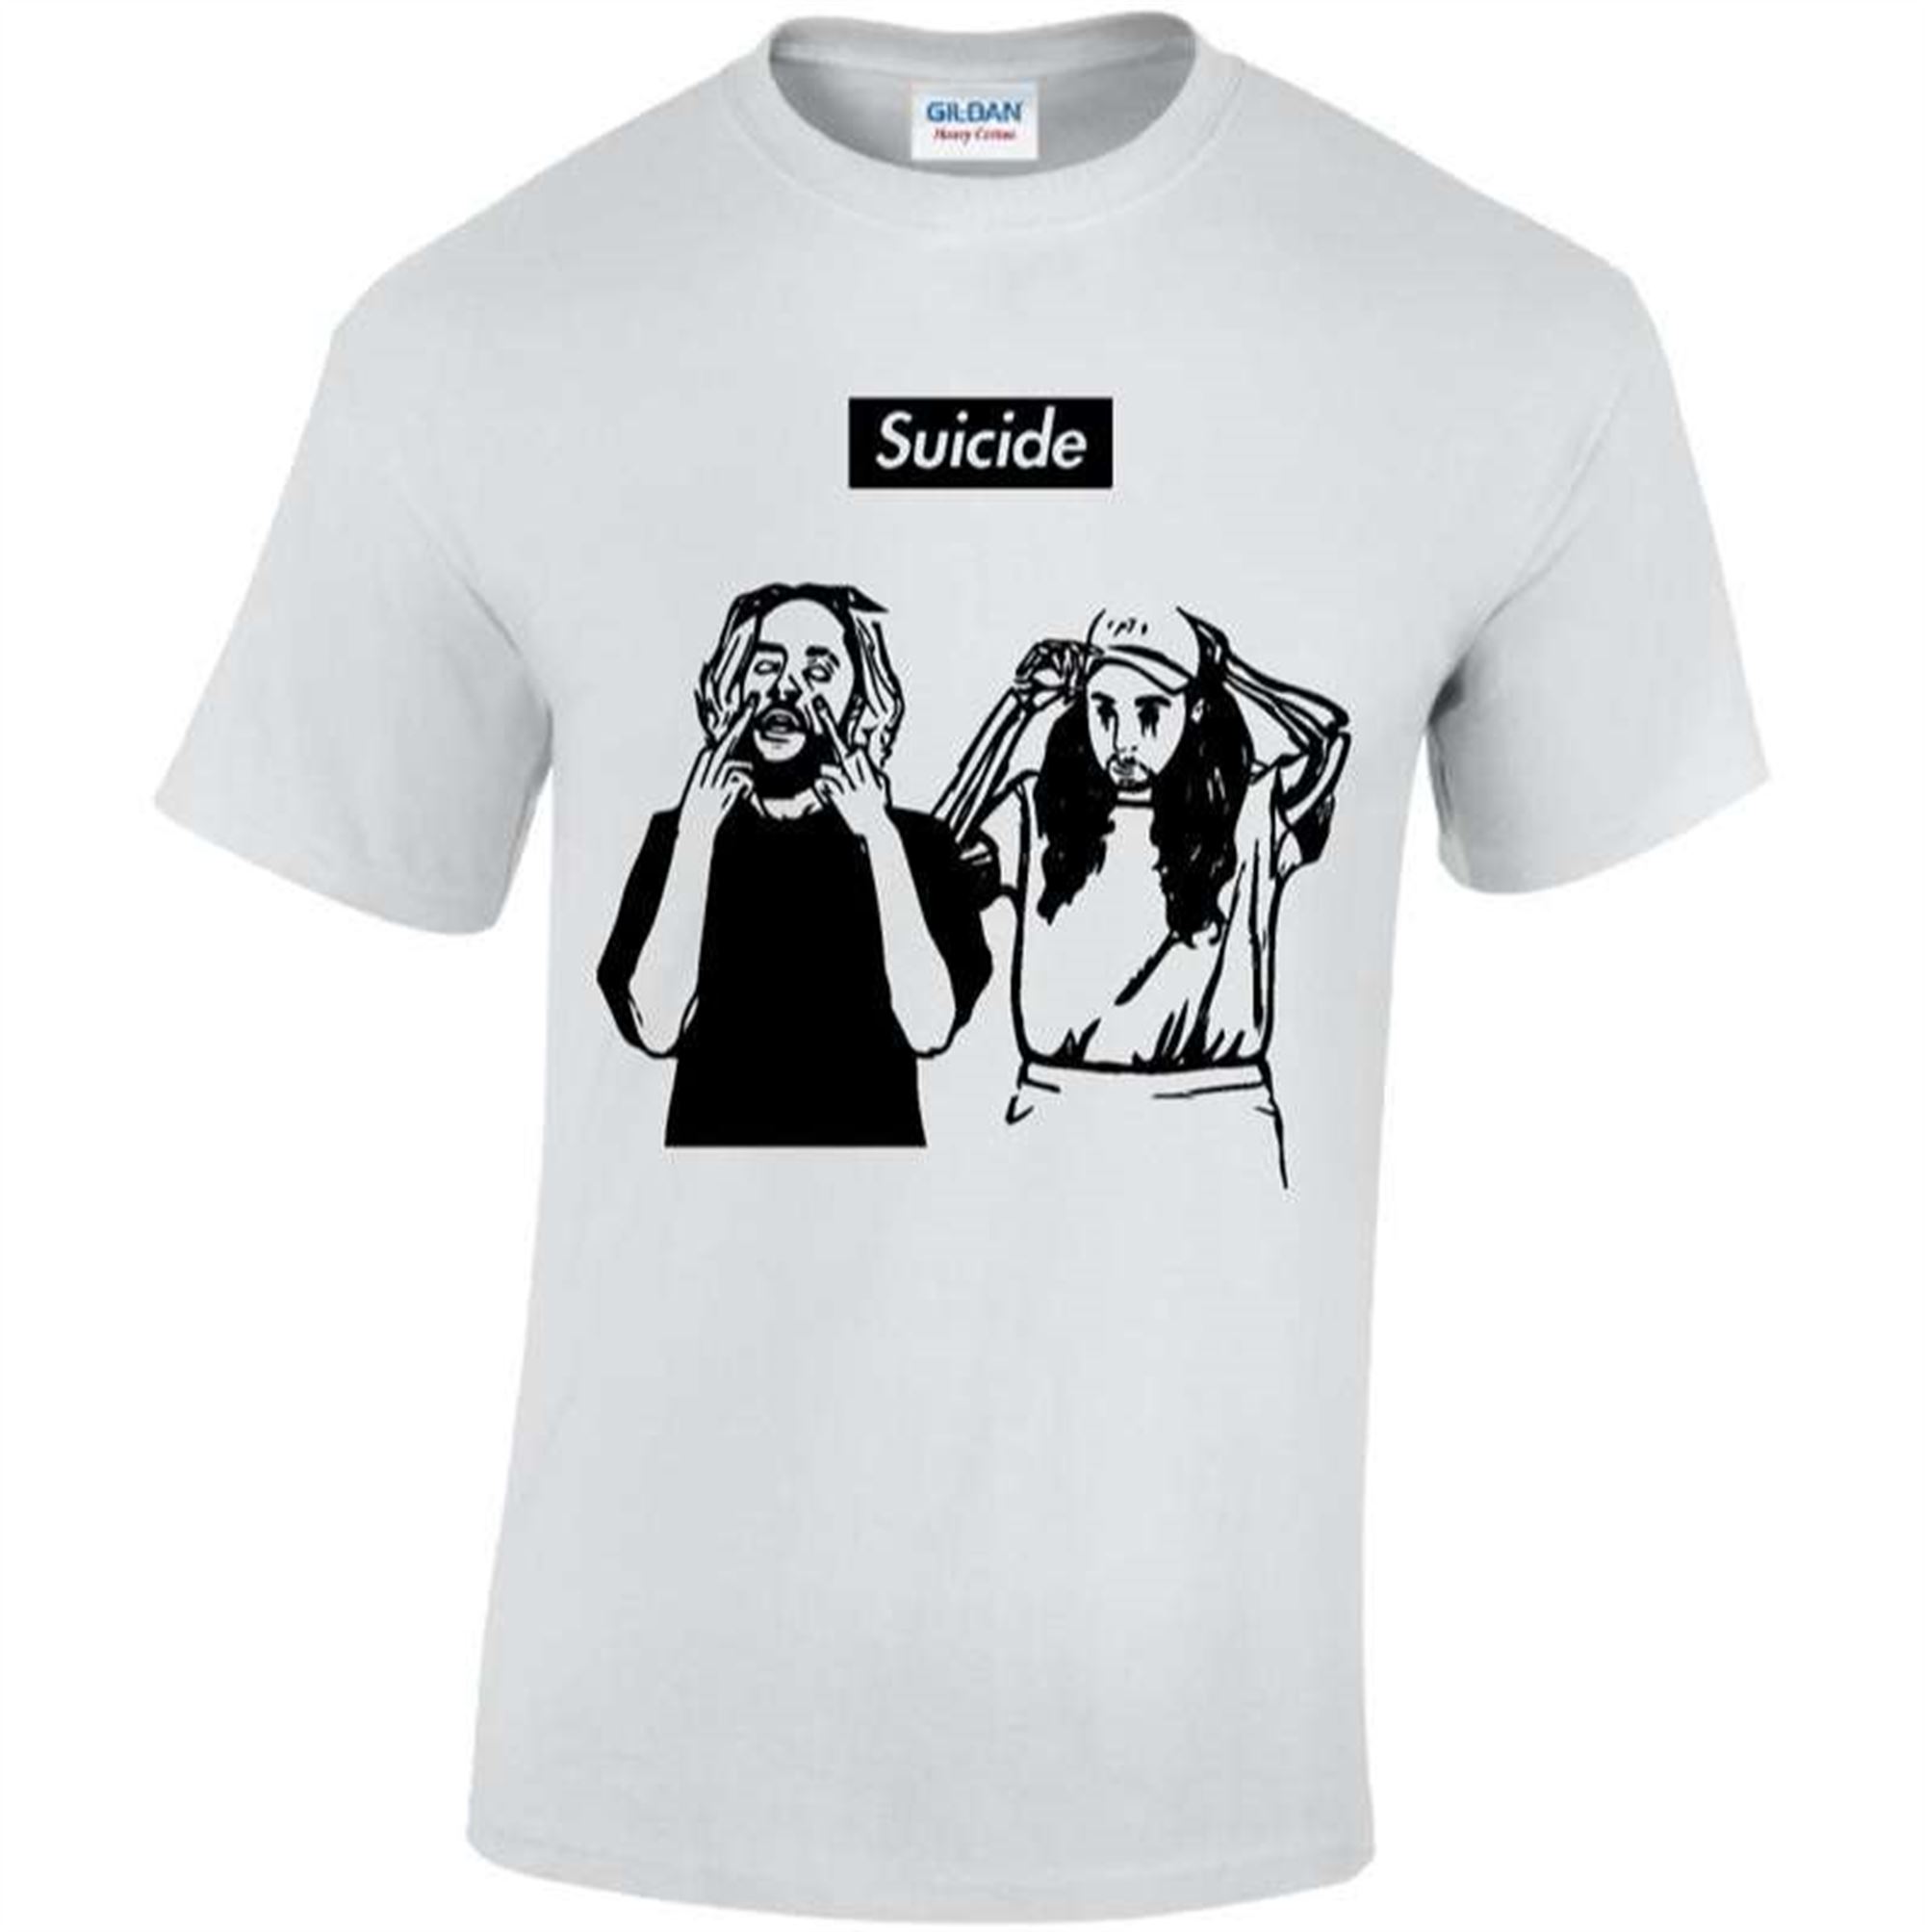 Suicideboys Suicide T-shirt Size Up To 5xl